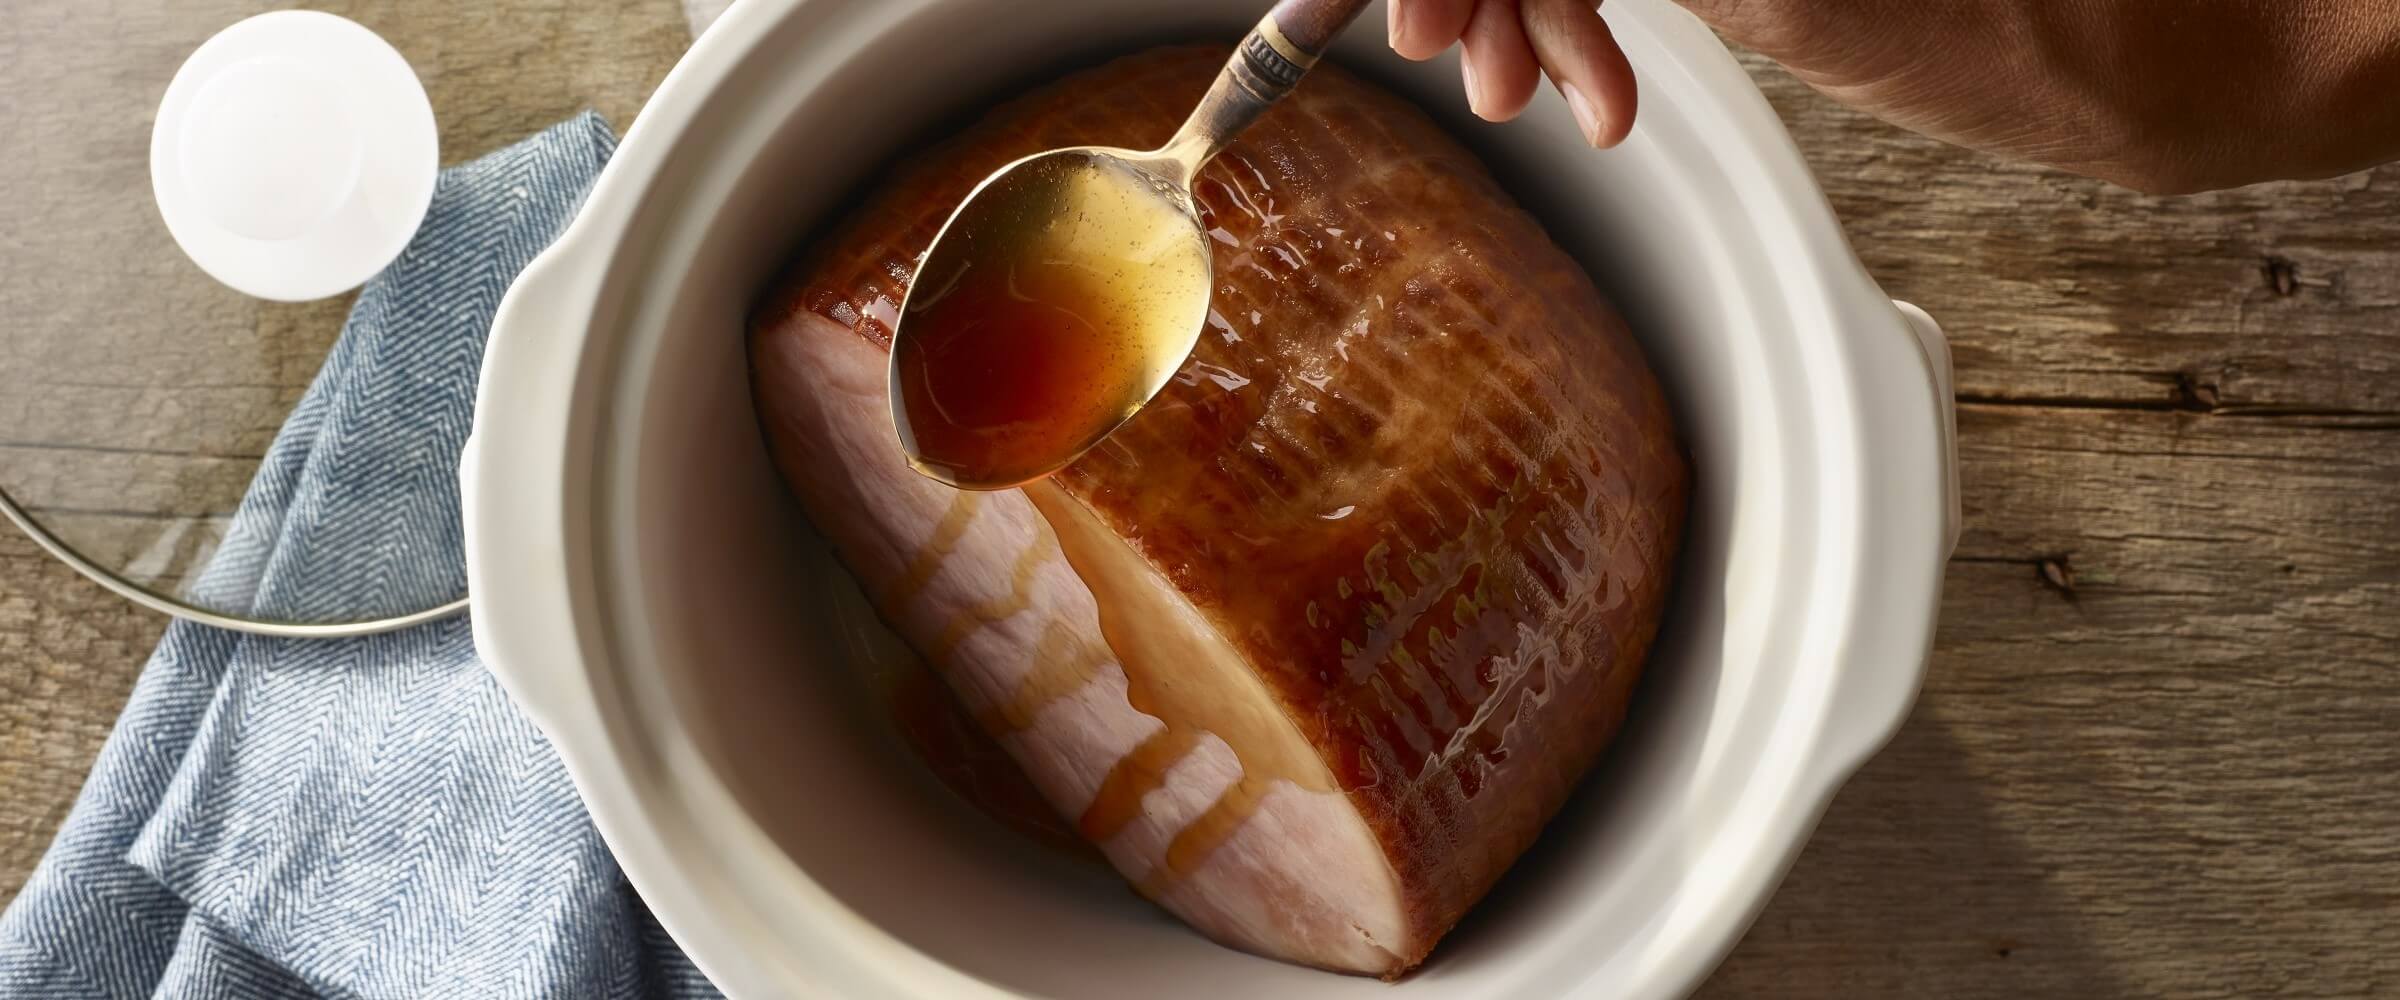 How to Cook a Ham in the Oven, Baked with Glaze - Adventures of Mel